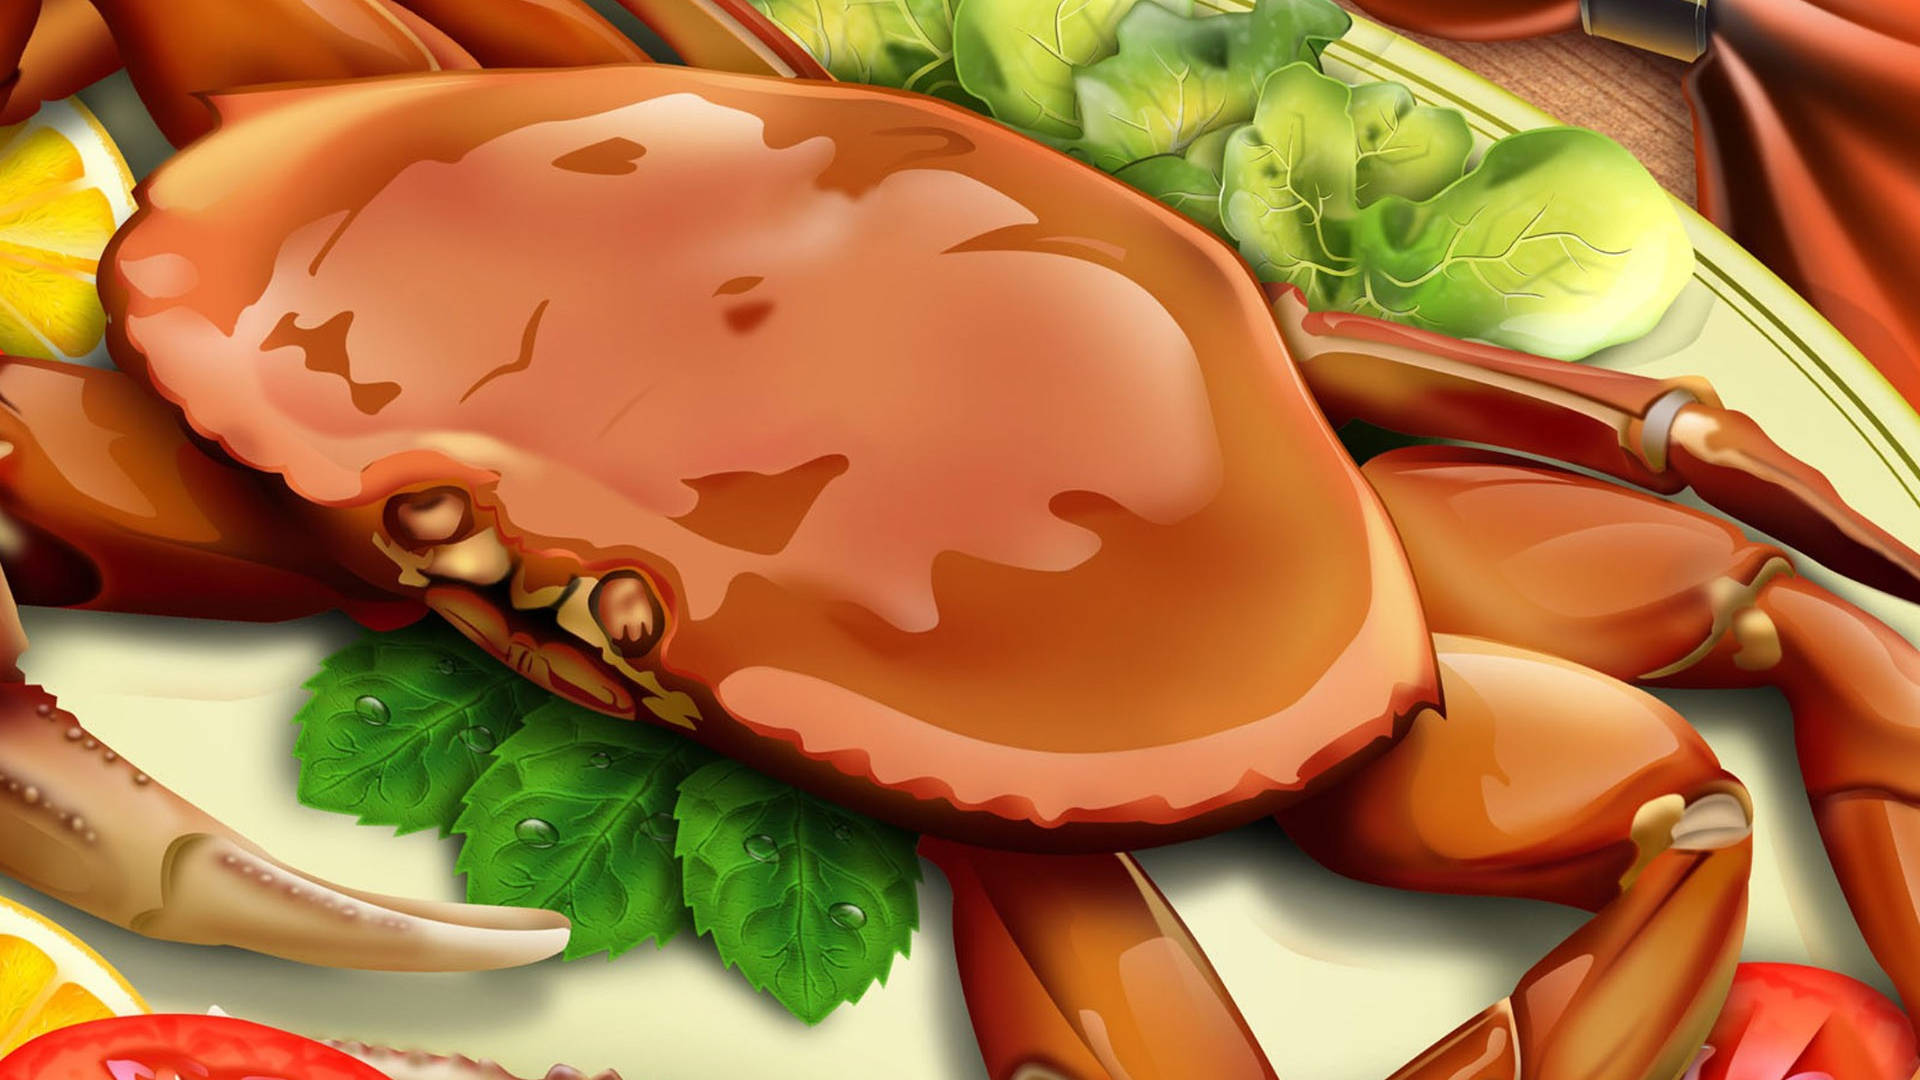 Delicious Crab With Sauce Wallpaper